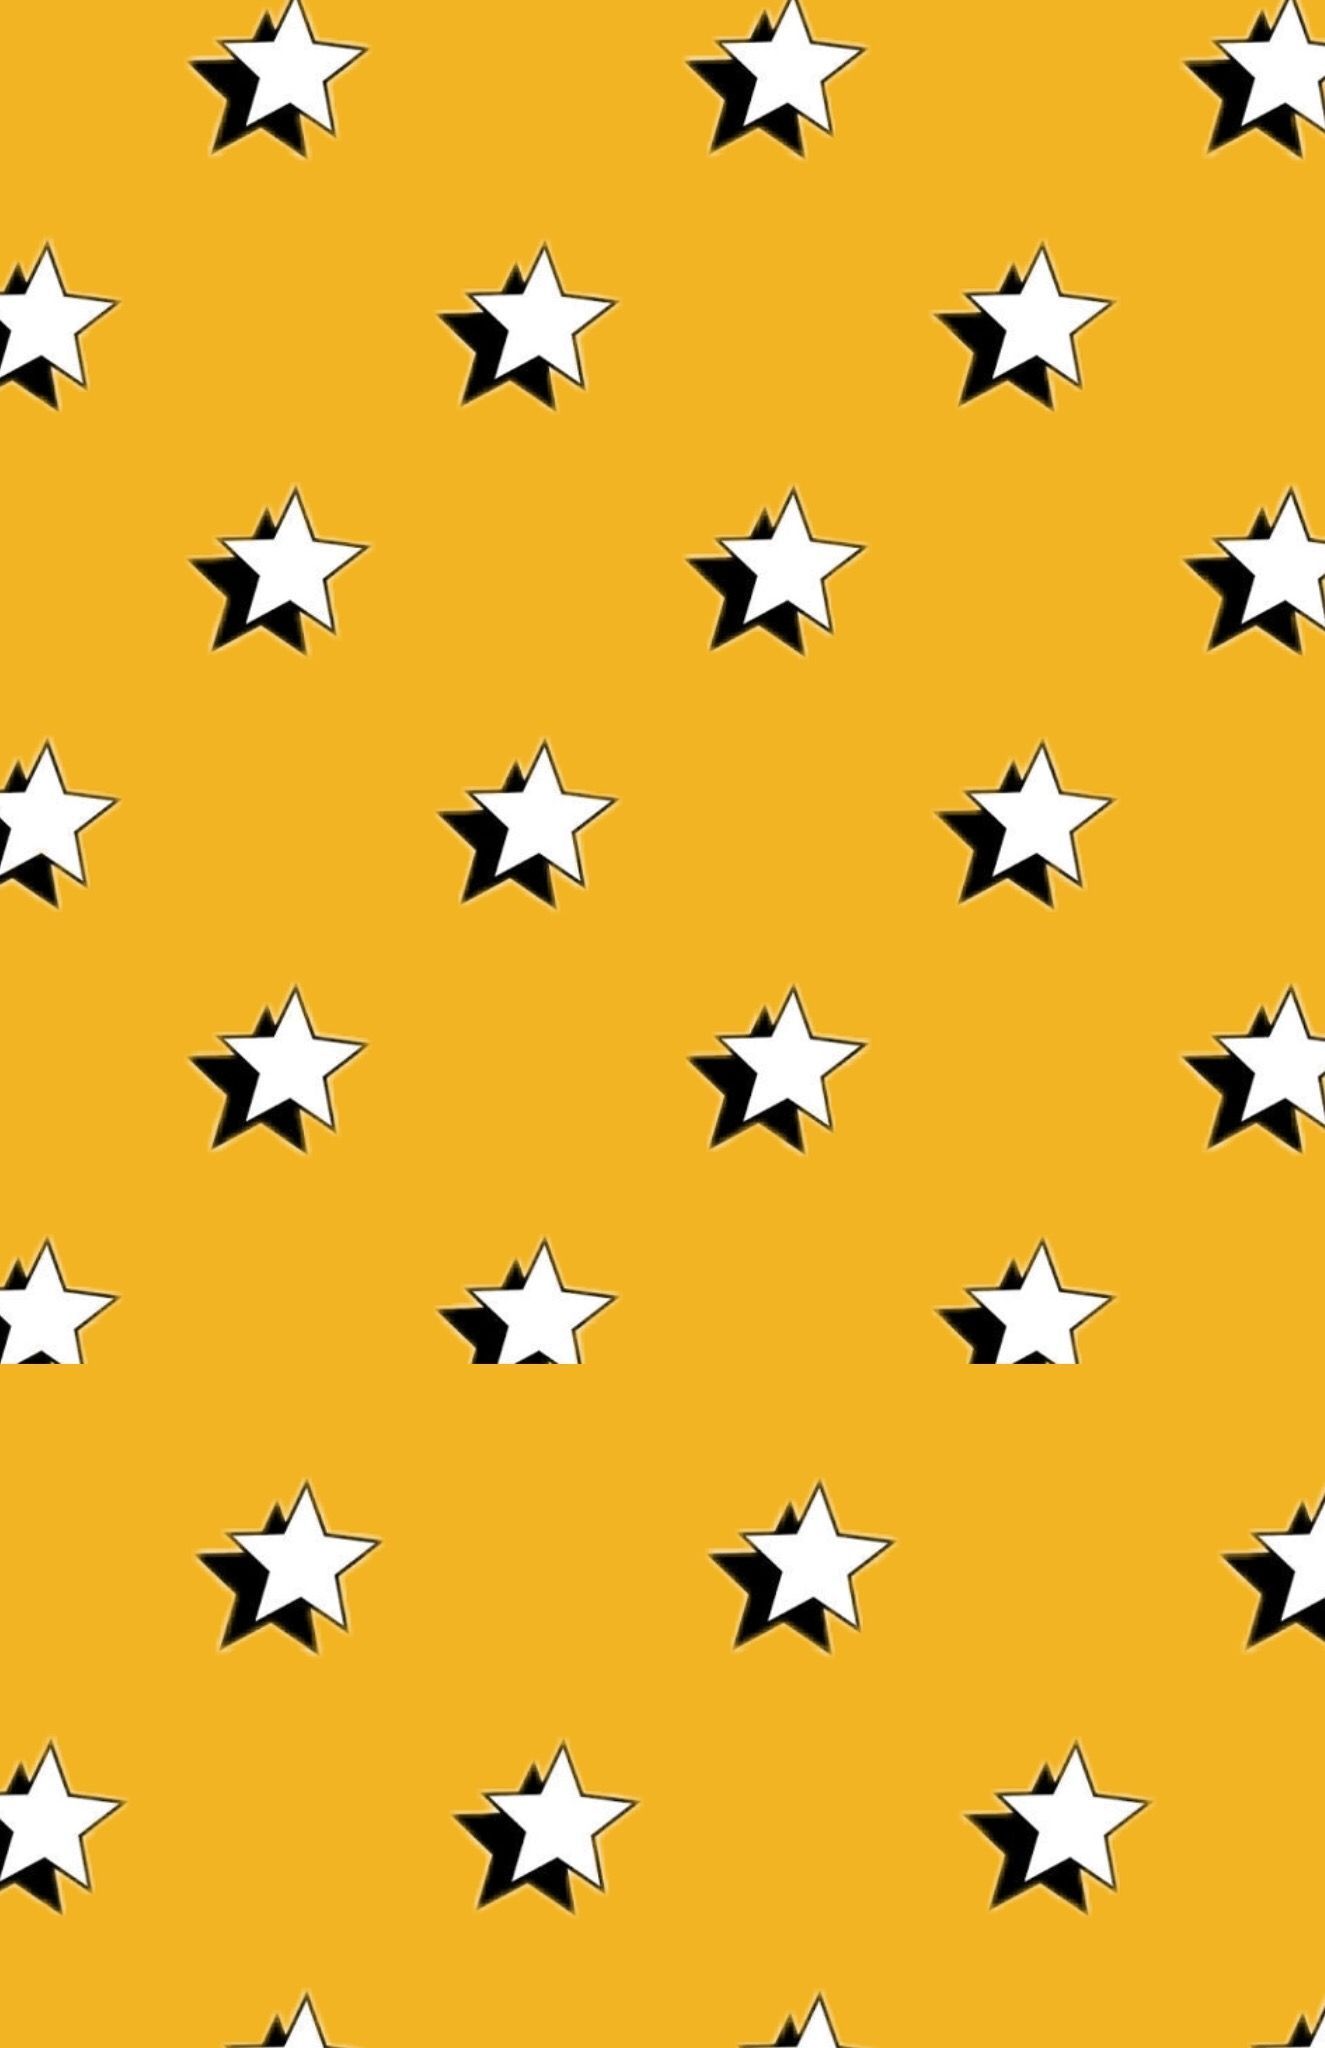 A pattern of white stars on a yellow background - Stars